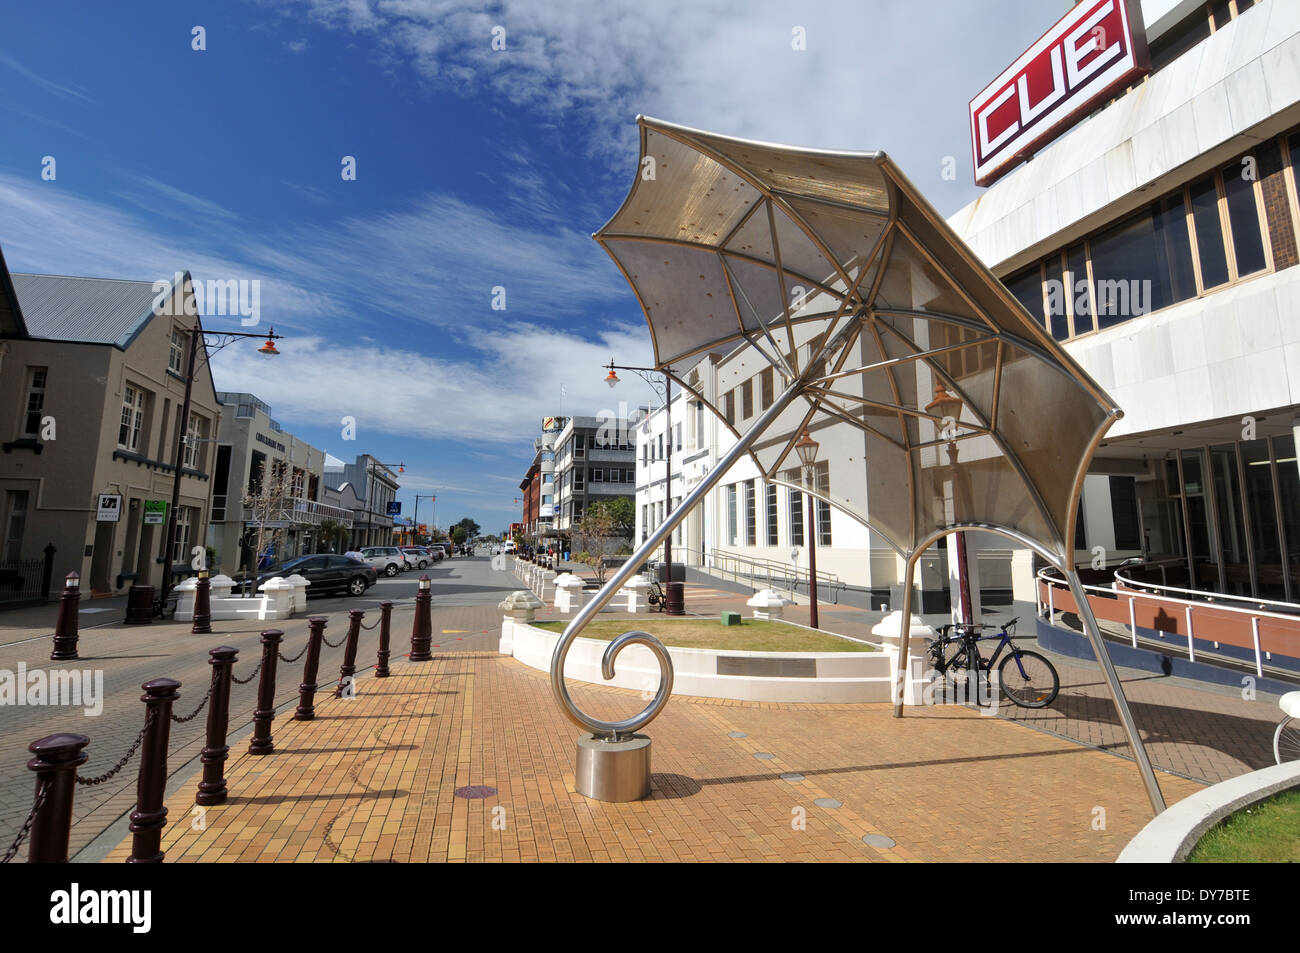 'The Umbrella', sundial and sculpture in the streets of Invercargill, South Island, New Zealand Stock Photo